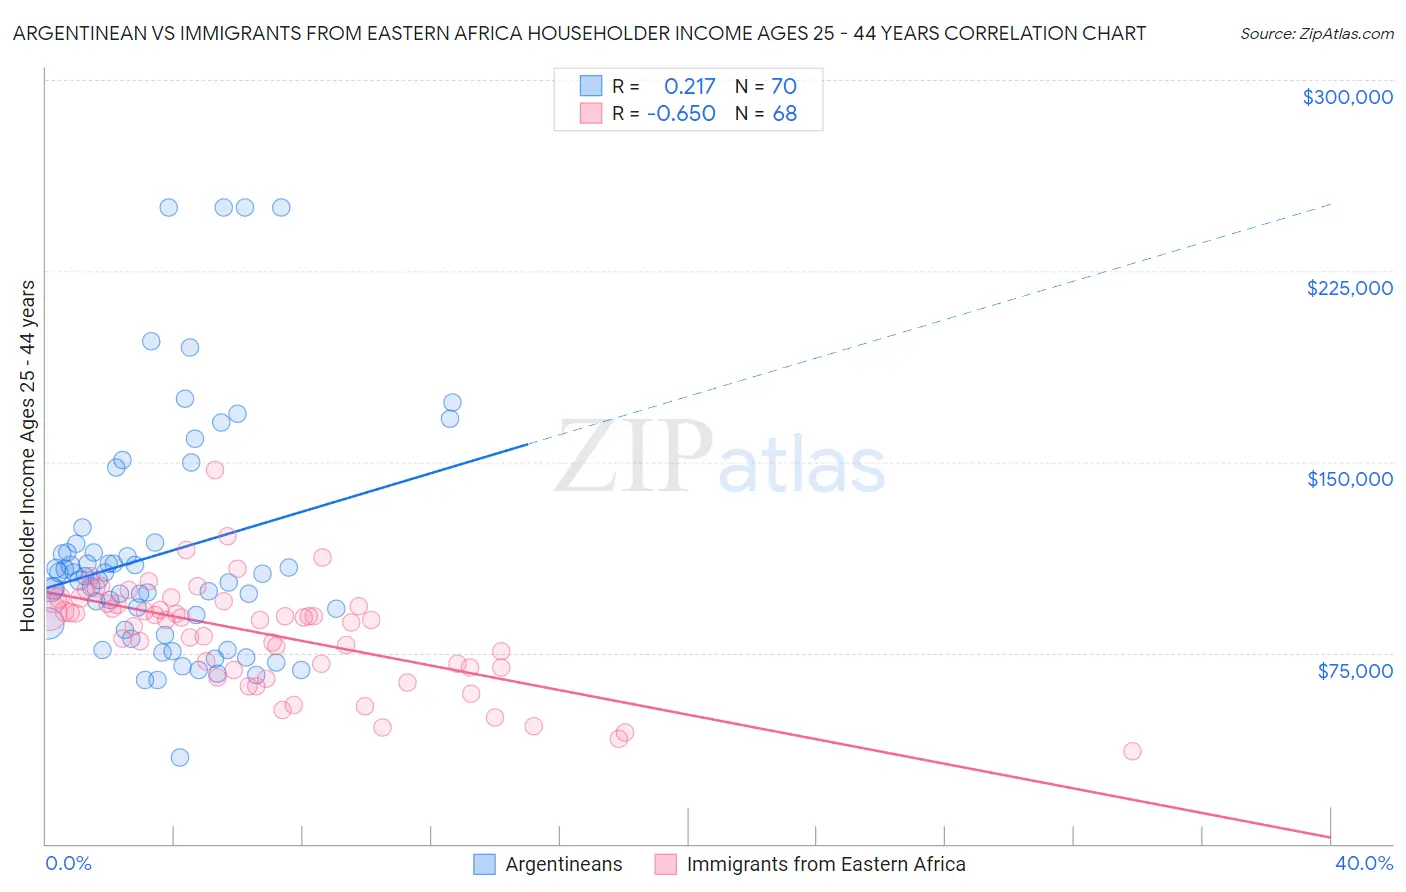 Argentinean vs Immigrants from Eastern Africa Householder Income Ages 25 - 44 years